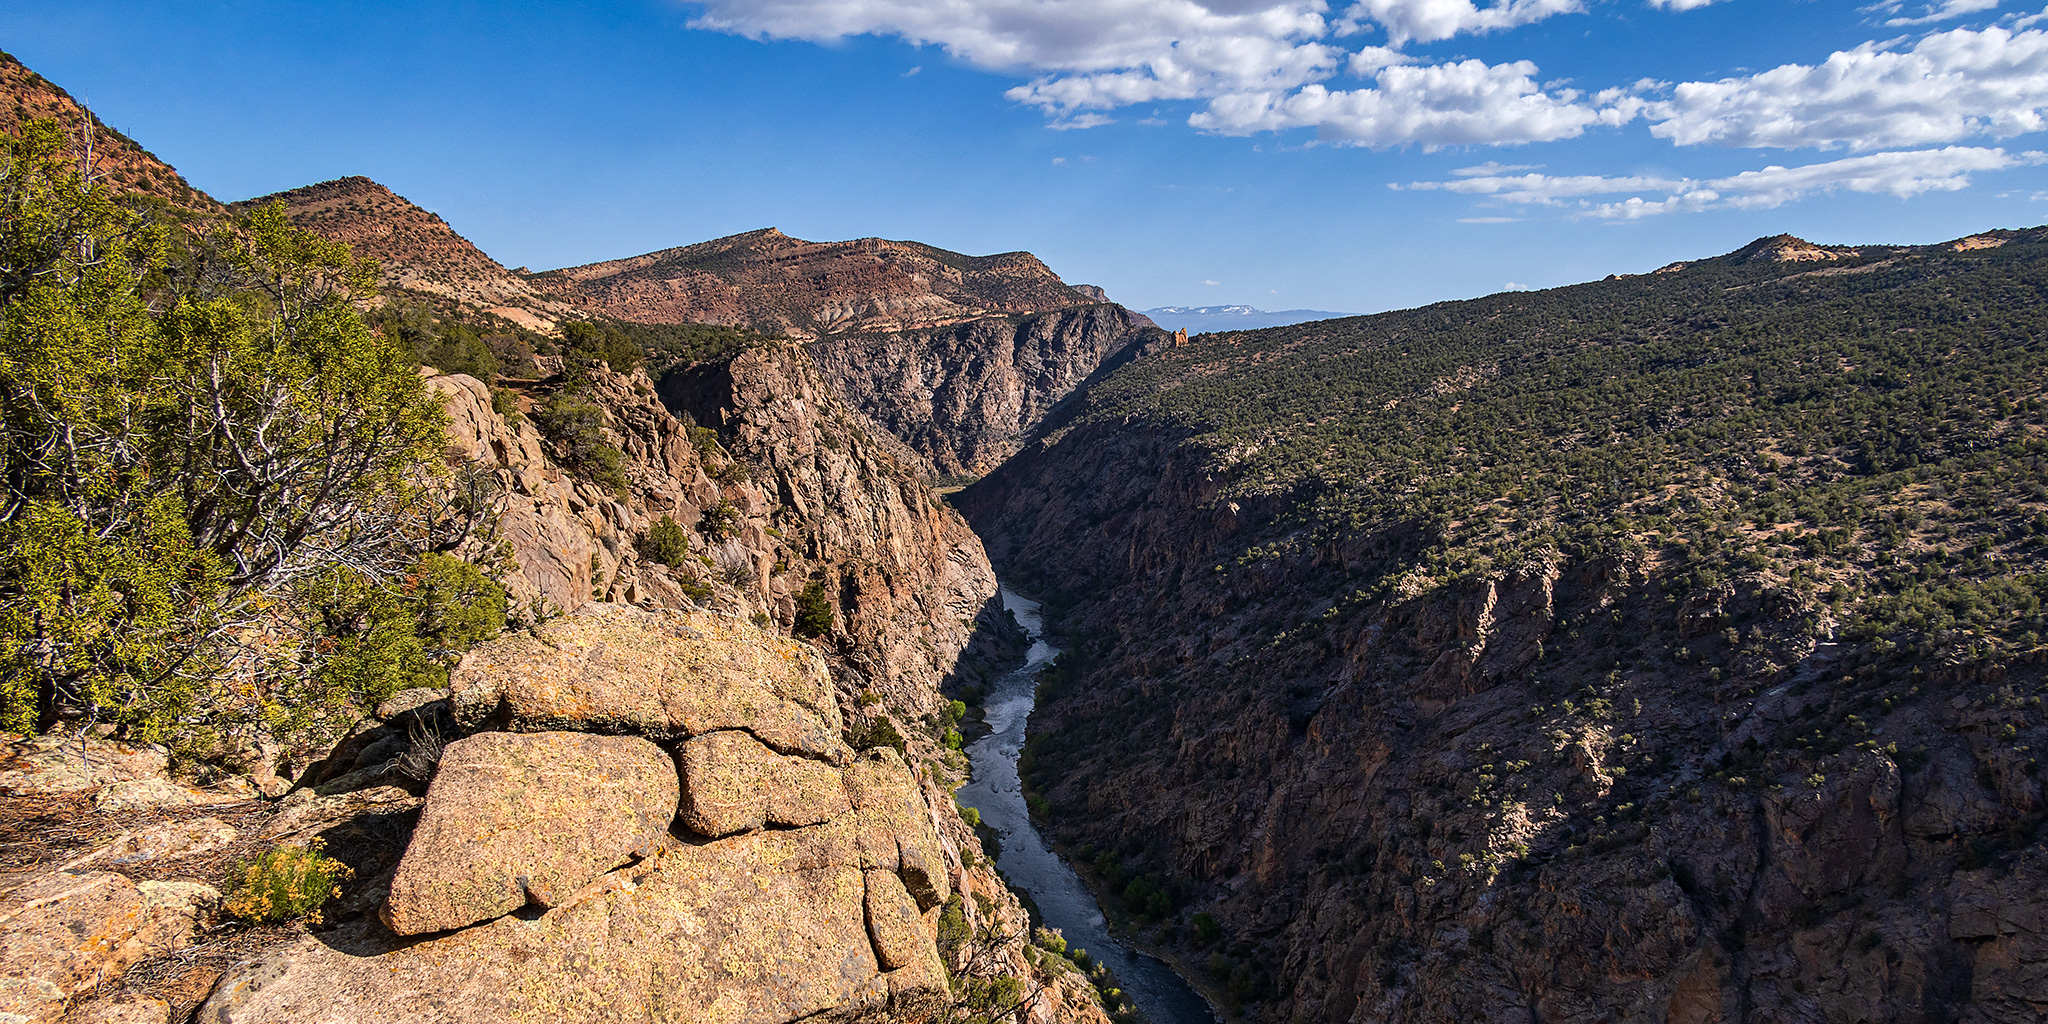 Along the Rim of the Gunnison Gorge